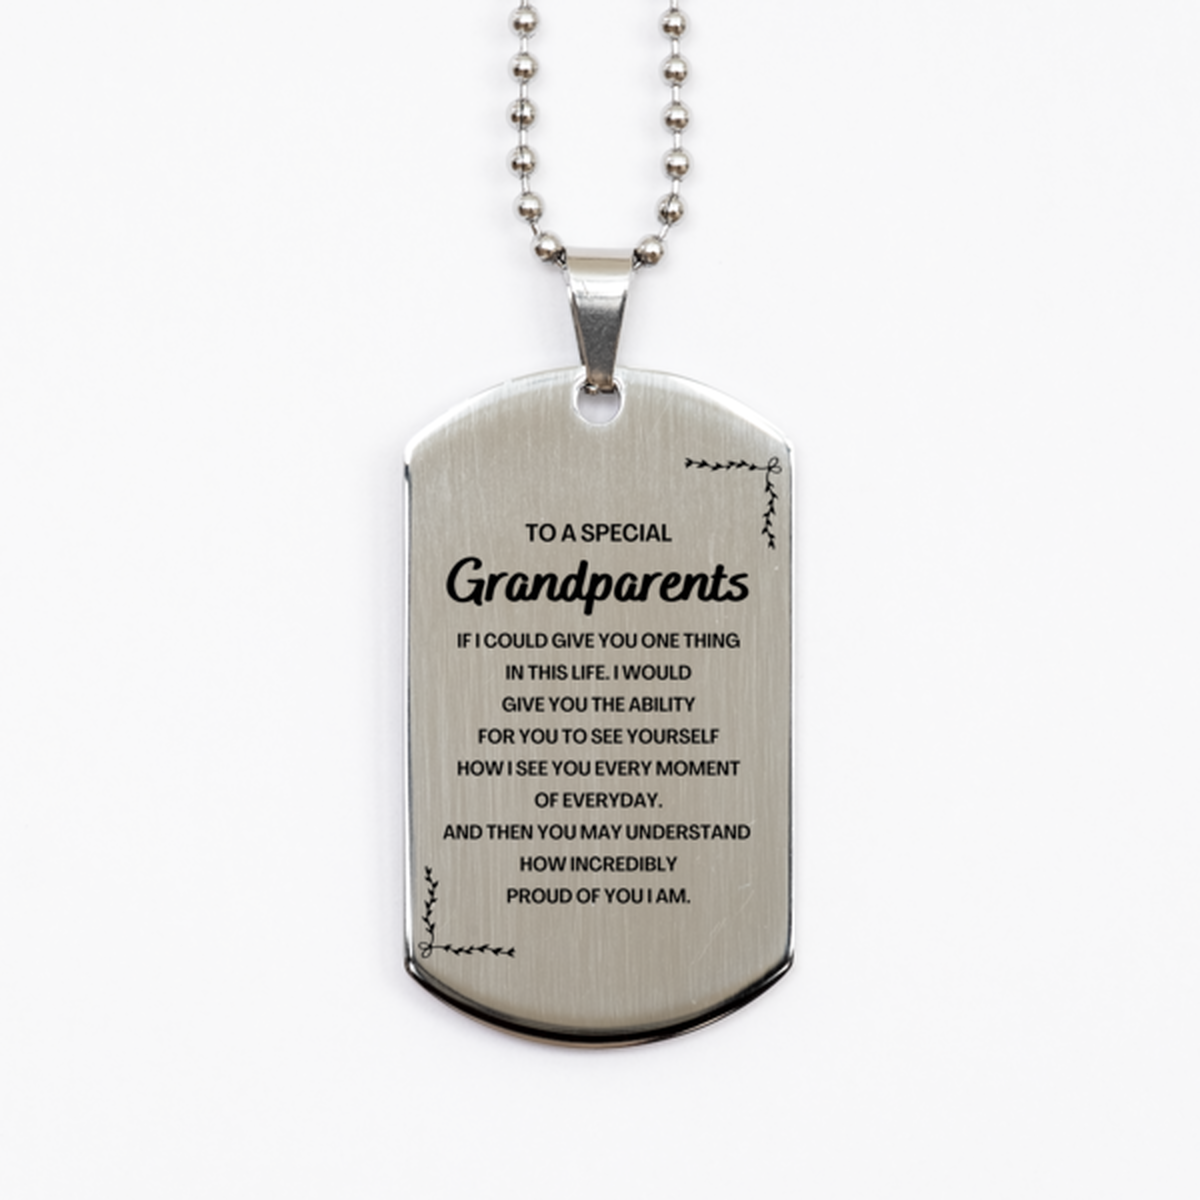 To My Grandparents Silver Dog Tag, Gifts For Grandparents Engraved, Inspirational Gifts for Christmas Birthday, Epic Gifts for Grandparents To A Special Grandparents how incredibly proud of you I am